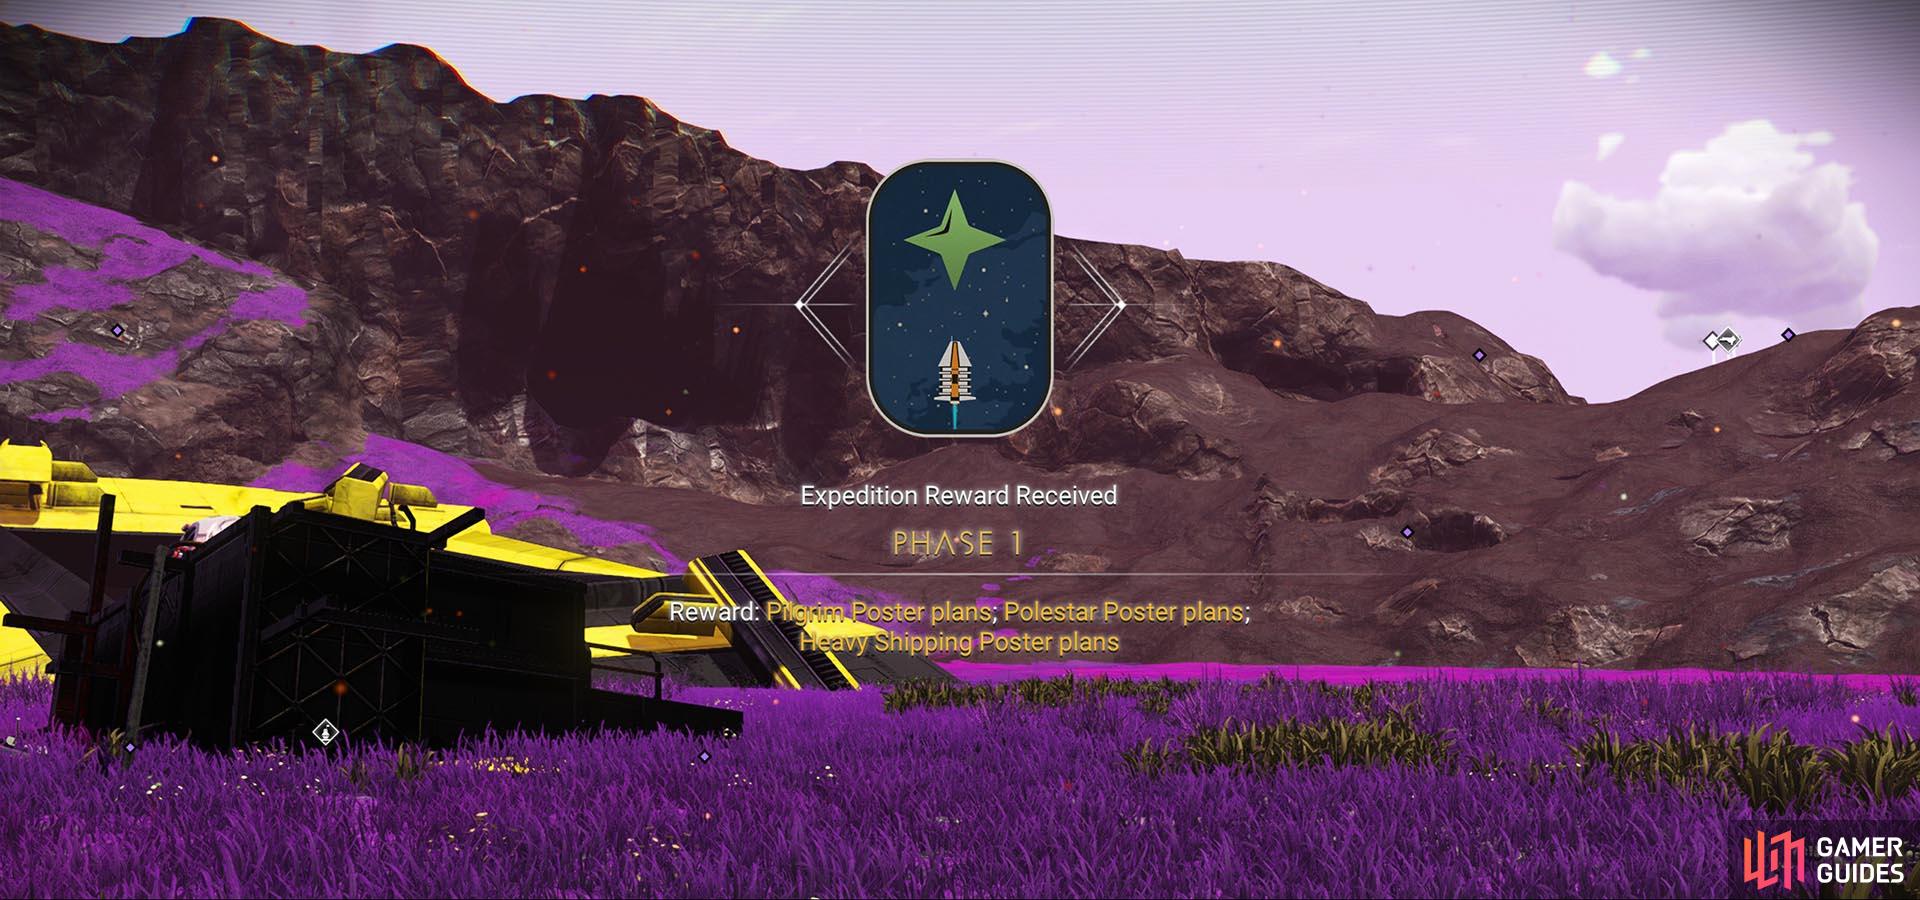 Unlocked rewards in the expedition can be used in any of NMS’s modes.